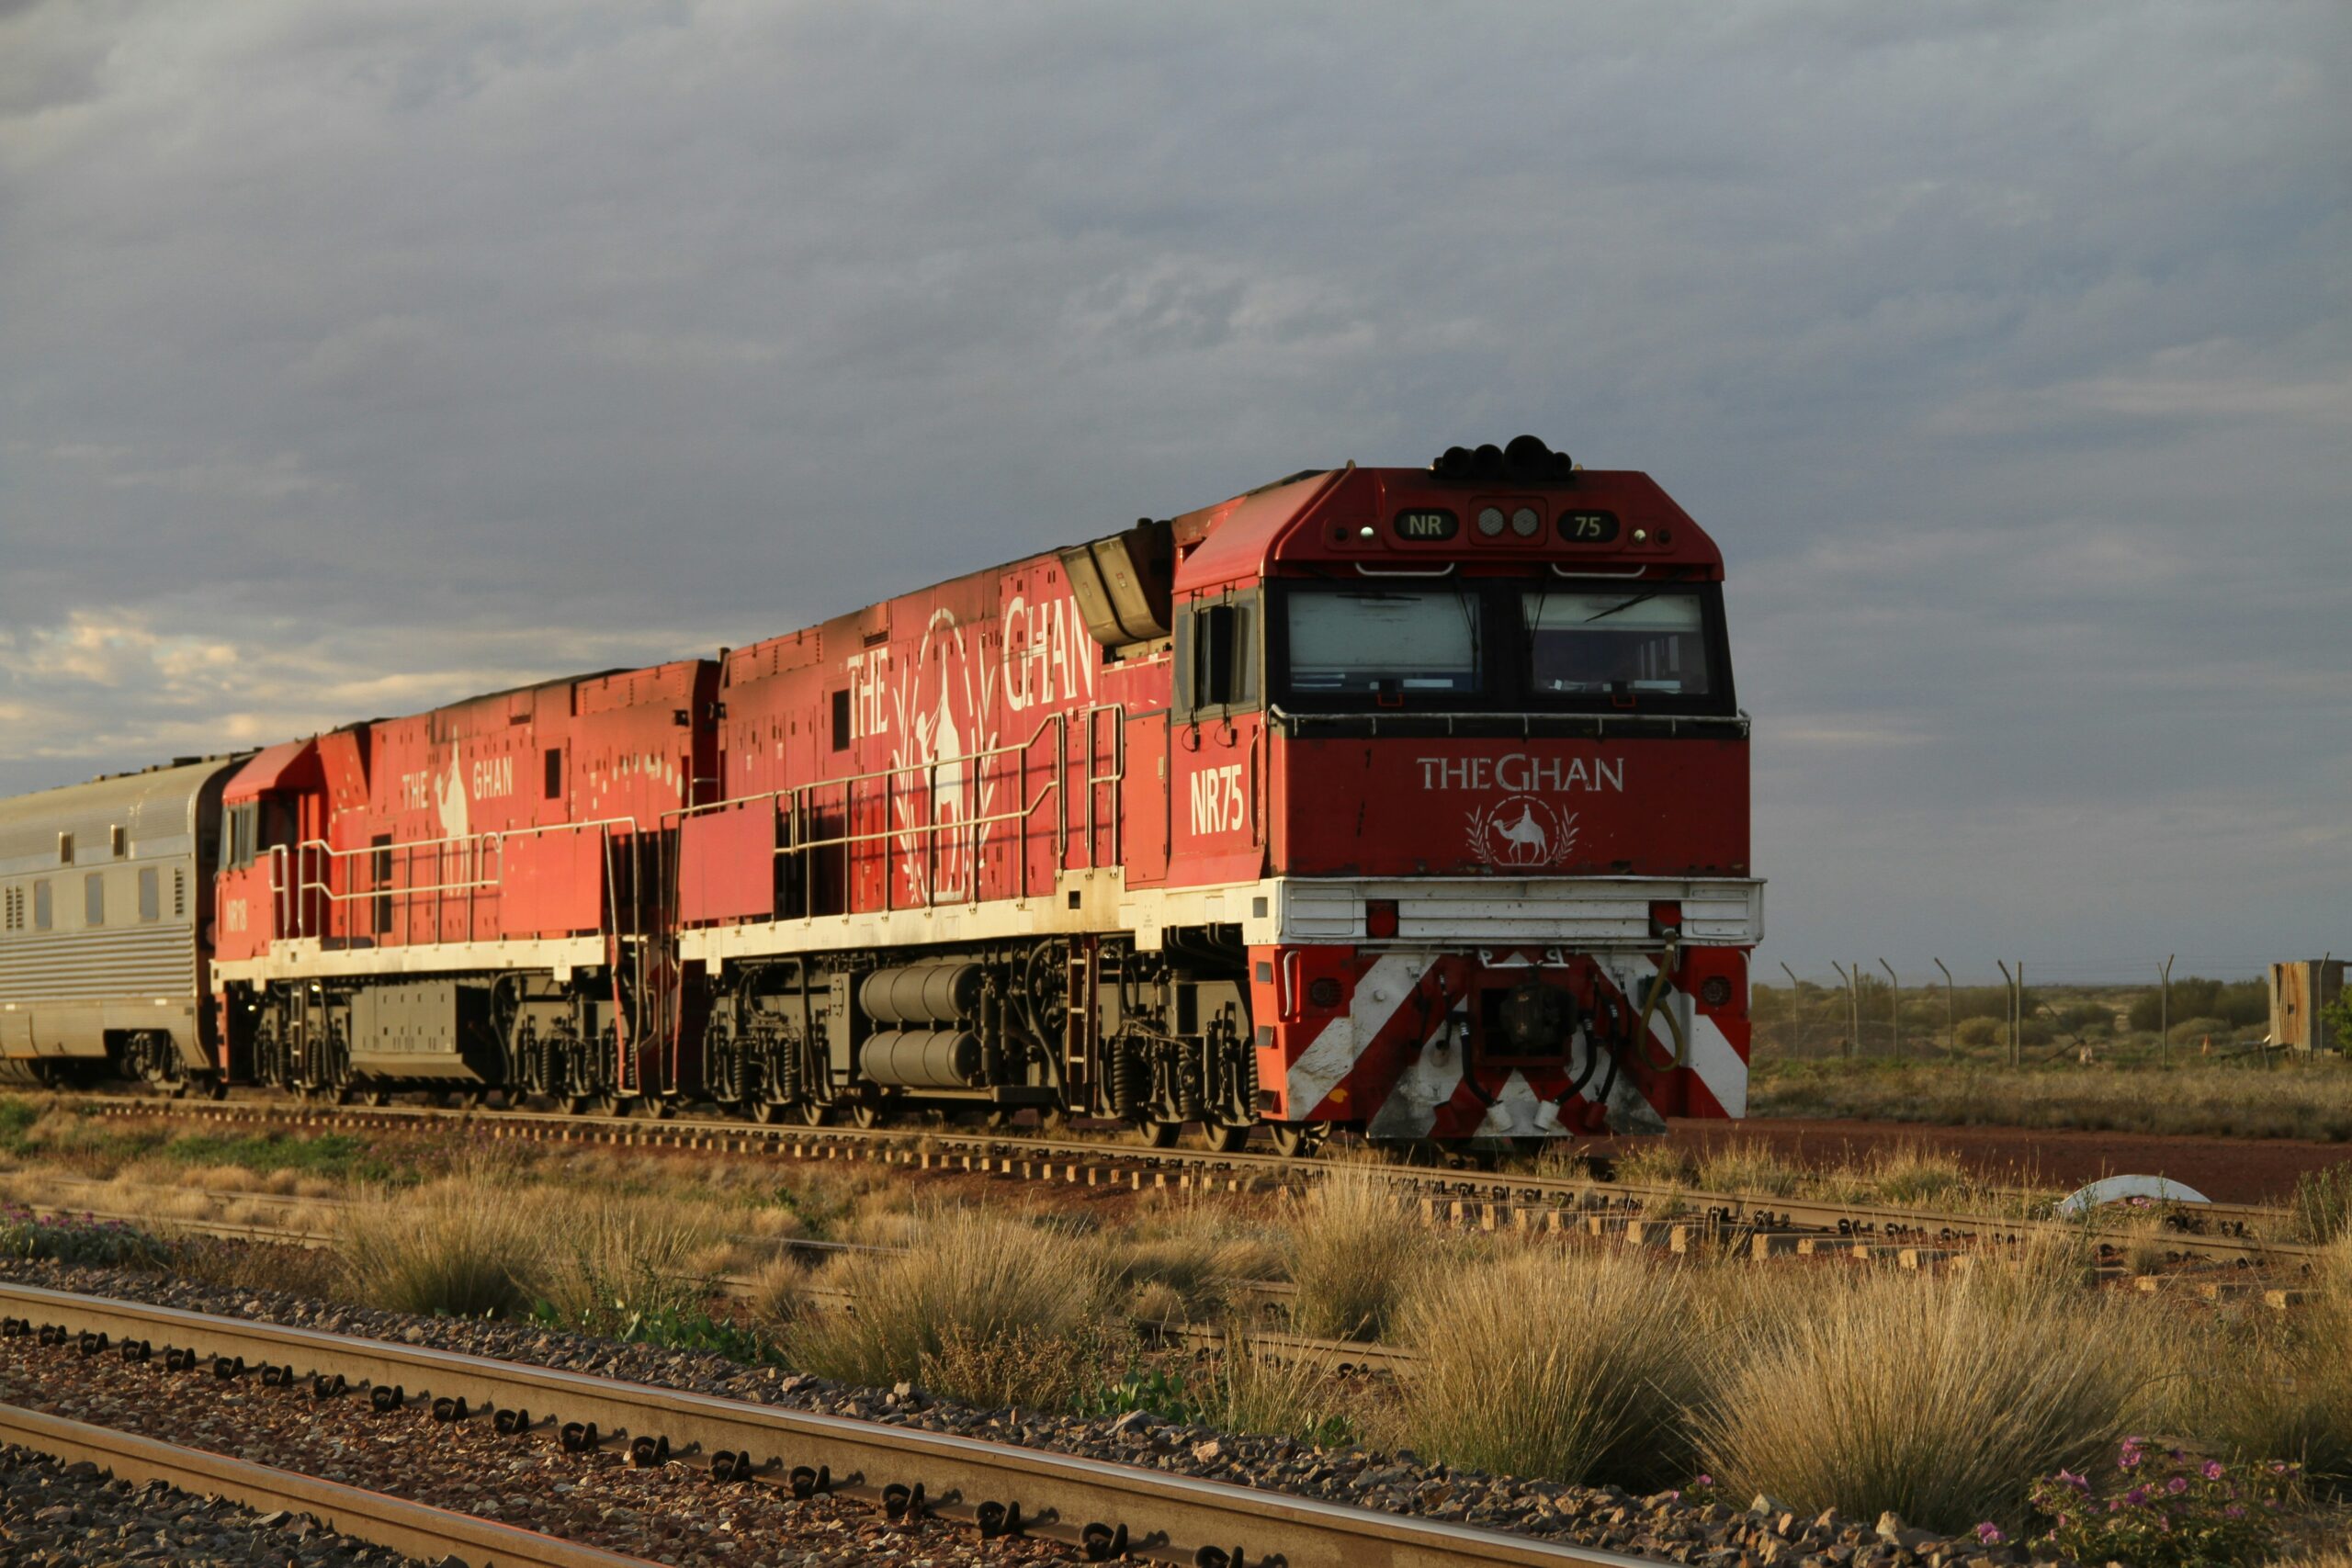 <p>One of Australia's most famous rail trips and one of the longest train rides is the Ghan. Three states are covered on the three-day, two-night trip: South Australia, Northern Territory, and Western Australia. The MacDonnell Ranges, the Nullarbor Plain, and the Outback will all be seen as you go.</p>  <p>The Ghan train, named for the Afghan cameleers who were instrumental in building the outback's infrastructure, travels throughout Australia's enormous landscapes, including verdant hills and pastures, on its route from Adelaide to Darwin, stopping at well-known locations including Alice Springs and Katherine. This wonderful three- to four-day trip offers delicious onboard dining experiences in addition to off-train adventures as one of the longest train rides. A highlight is a picturesque cruise through Katherine Gorge in Nitmiluk National Park, which offers amazing views of the surrounding landscape.</p>